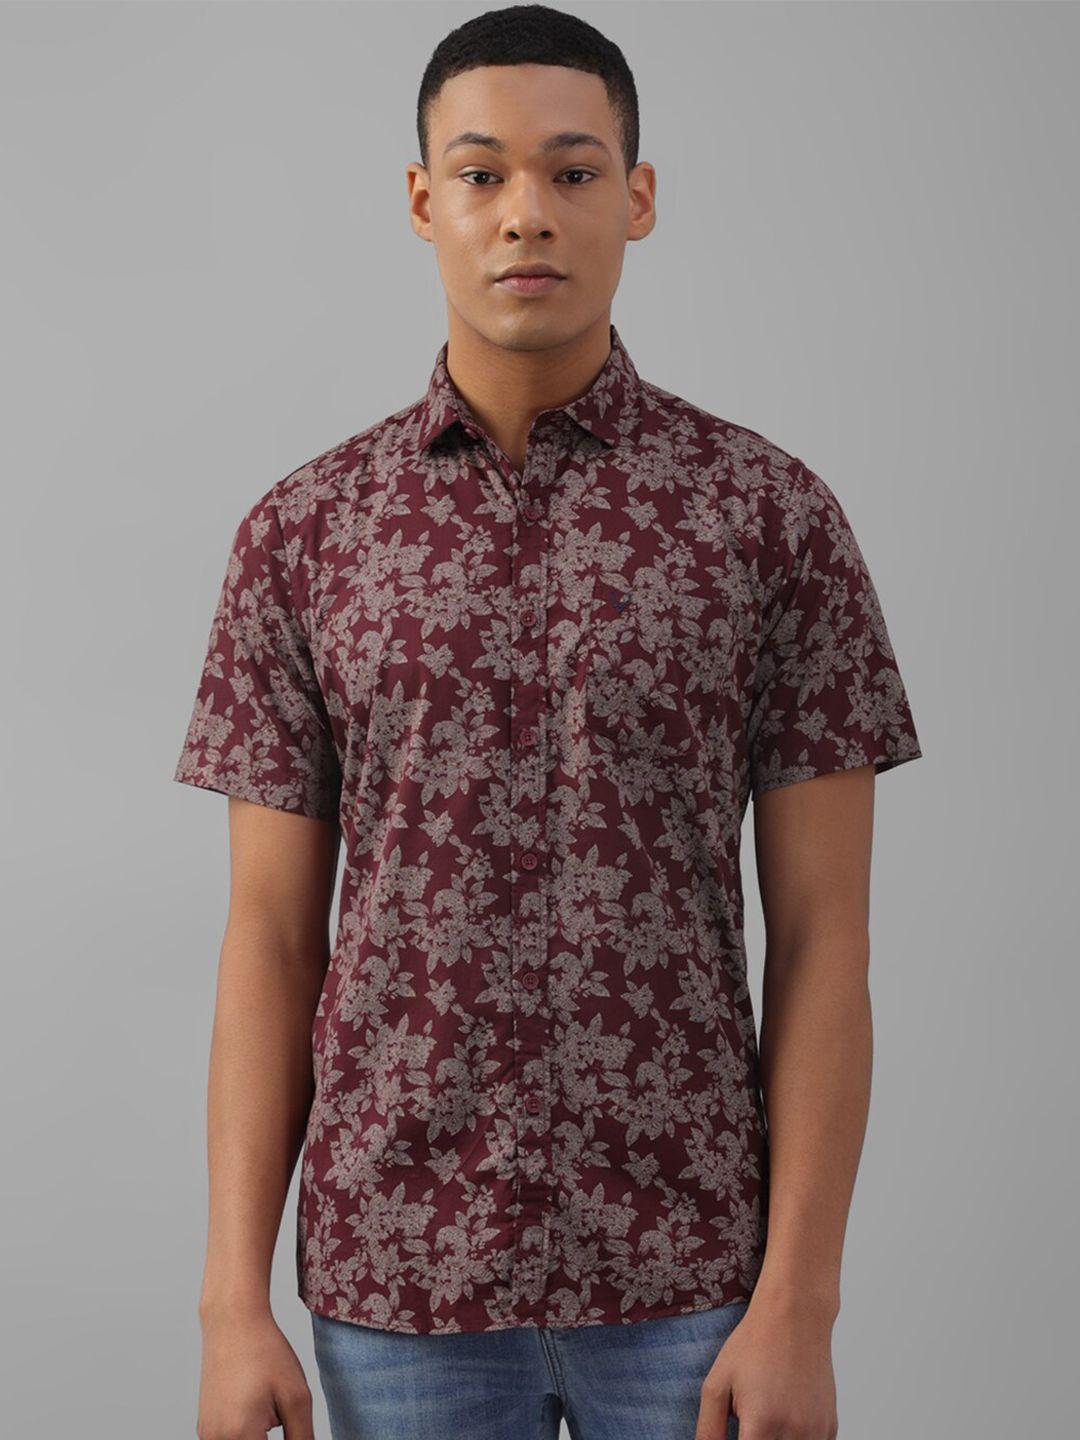 allen solly floral printed pure cotton casual shirt